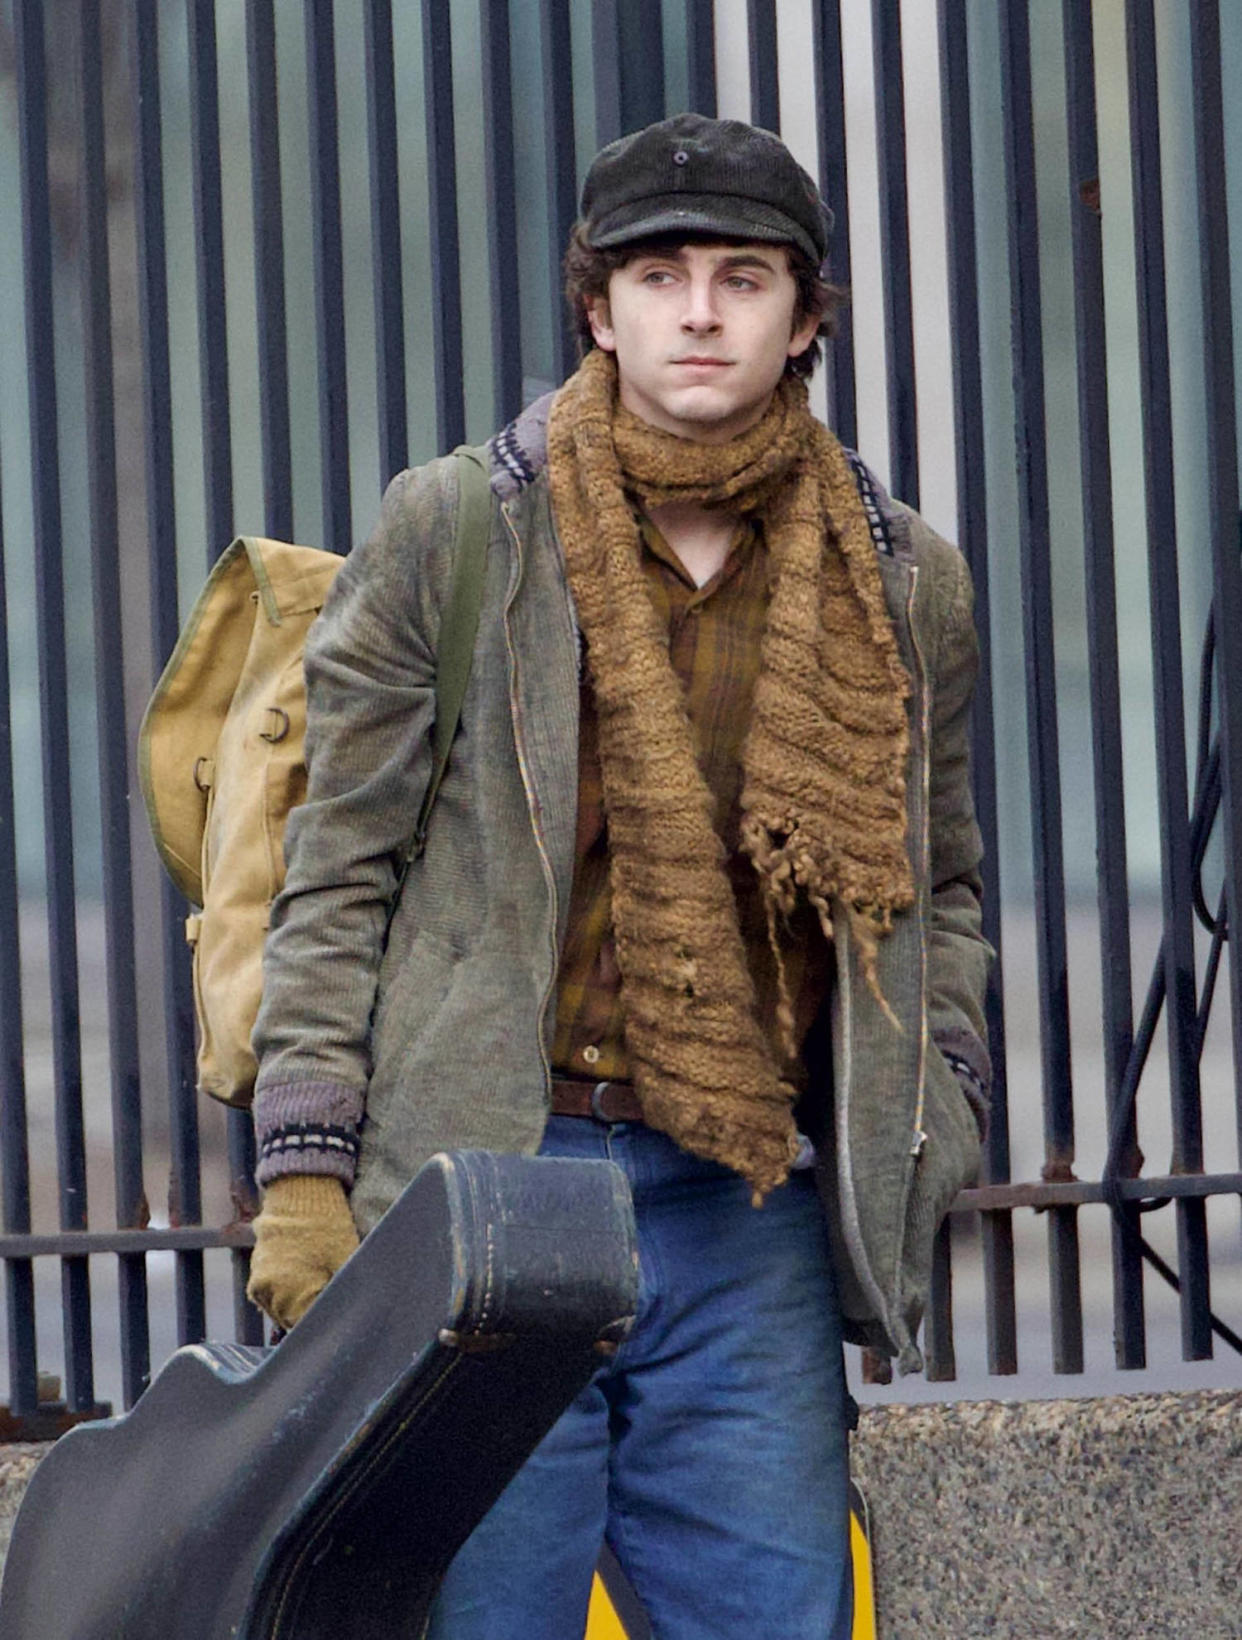 Timothee Chalamet plays Bob Dylan on the set of the movie 